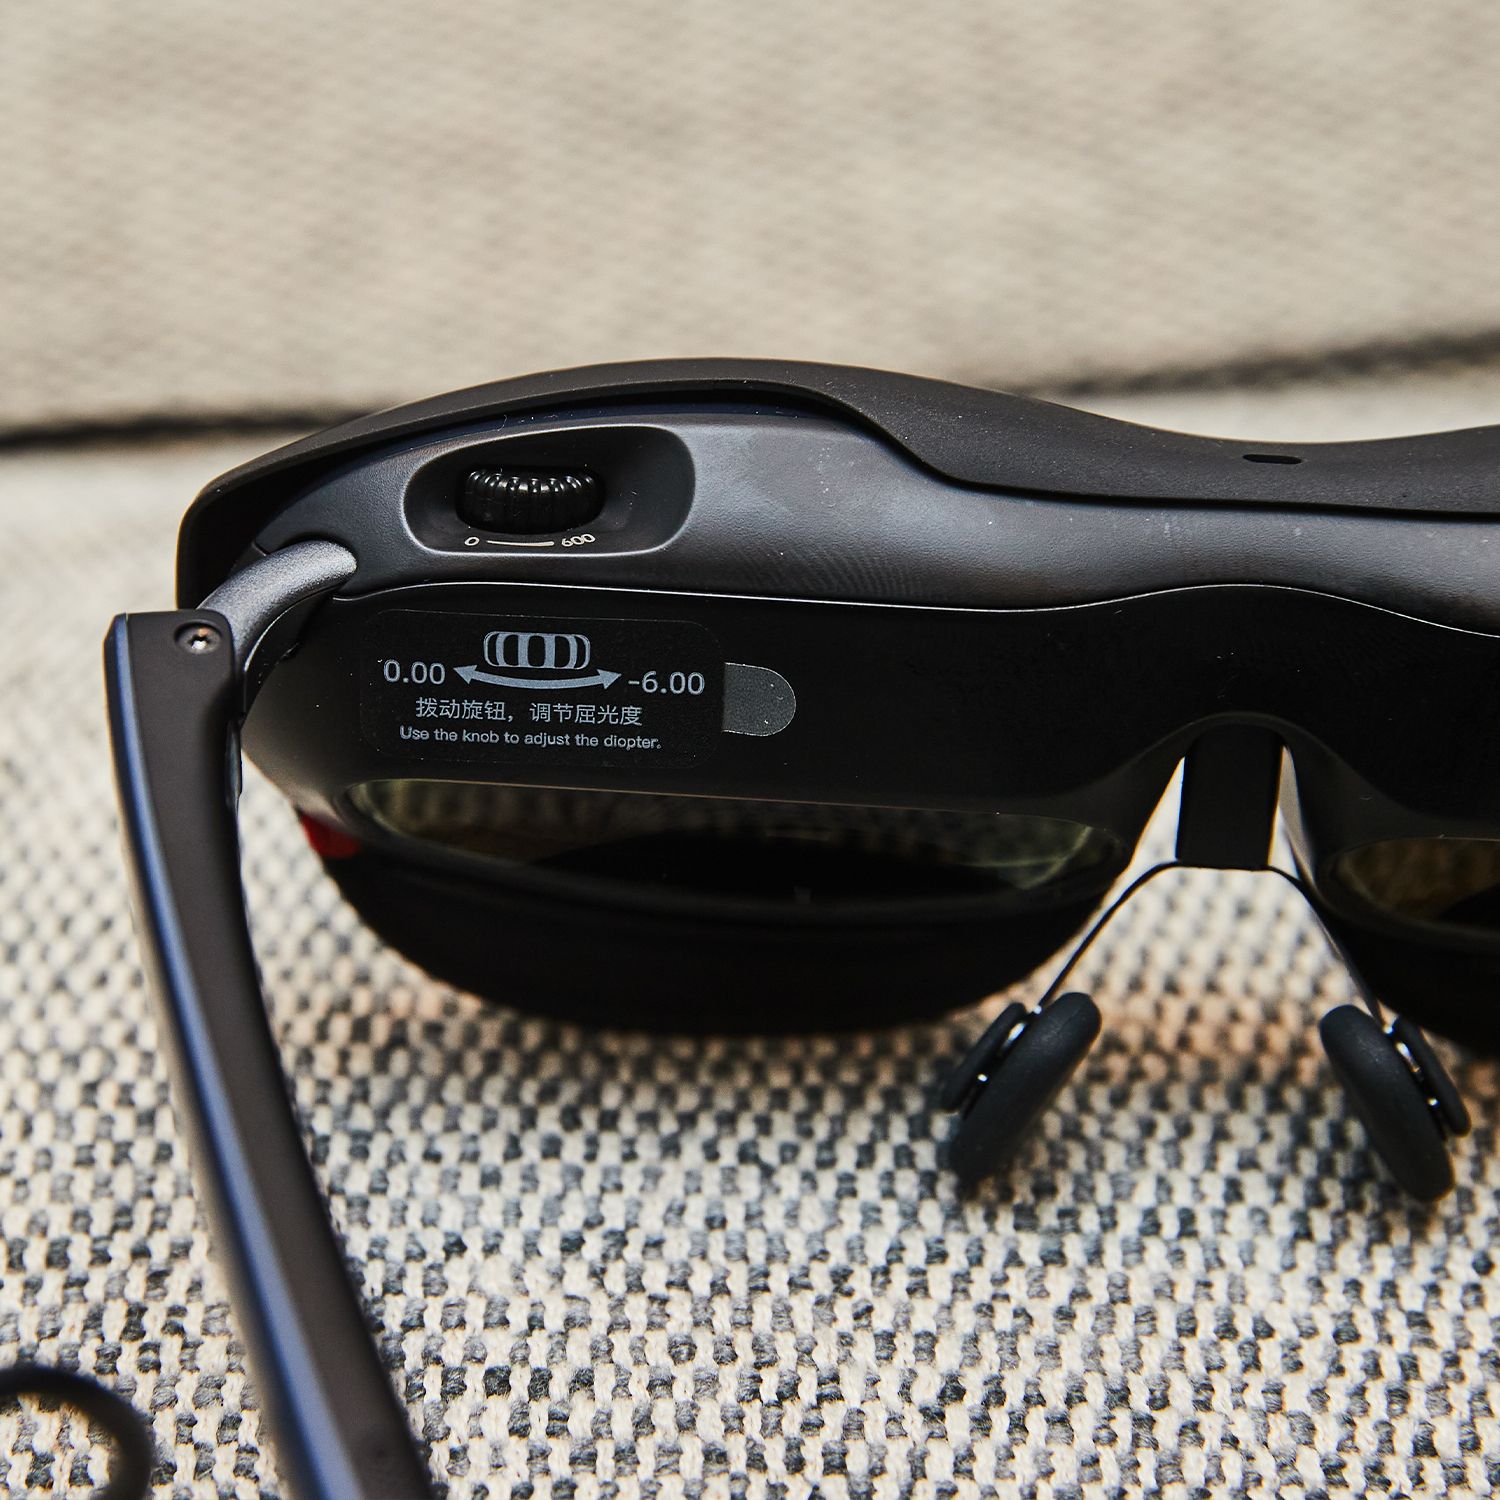 Nreal Air smart glasses review: A lightweight augmented reality